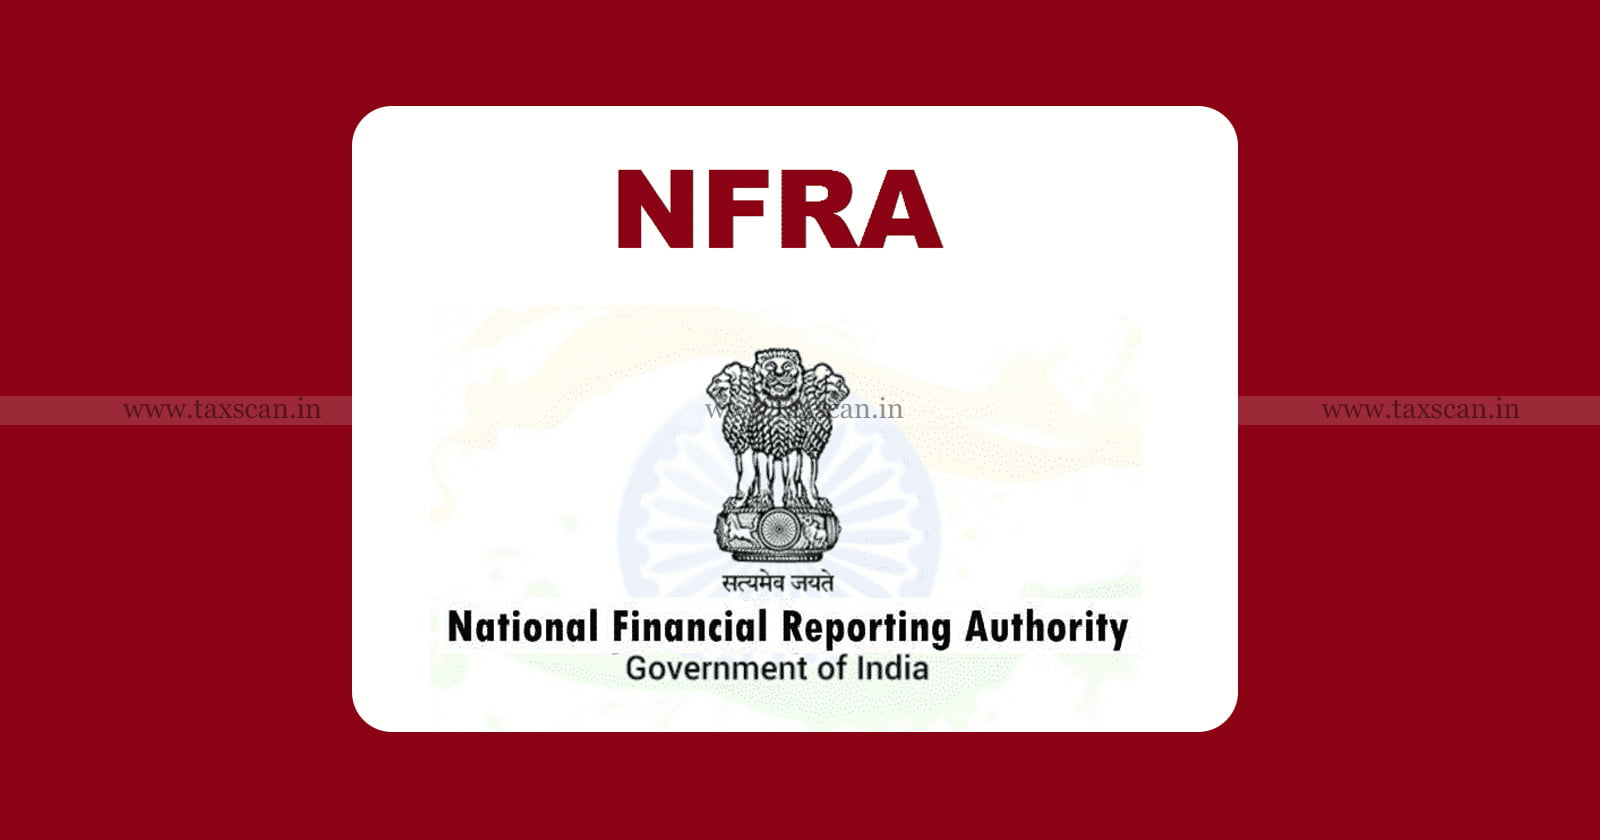 NFRA Imposes 1 Lakh Fine - NFRA - CA - Maintaining Standard Quality - Financial Statements - Standard Quality - Chartered Accountants - Taxscan